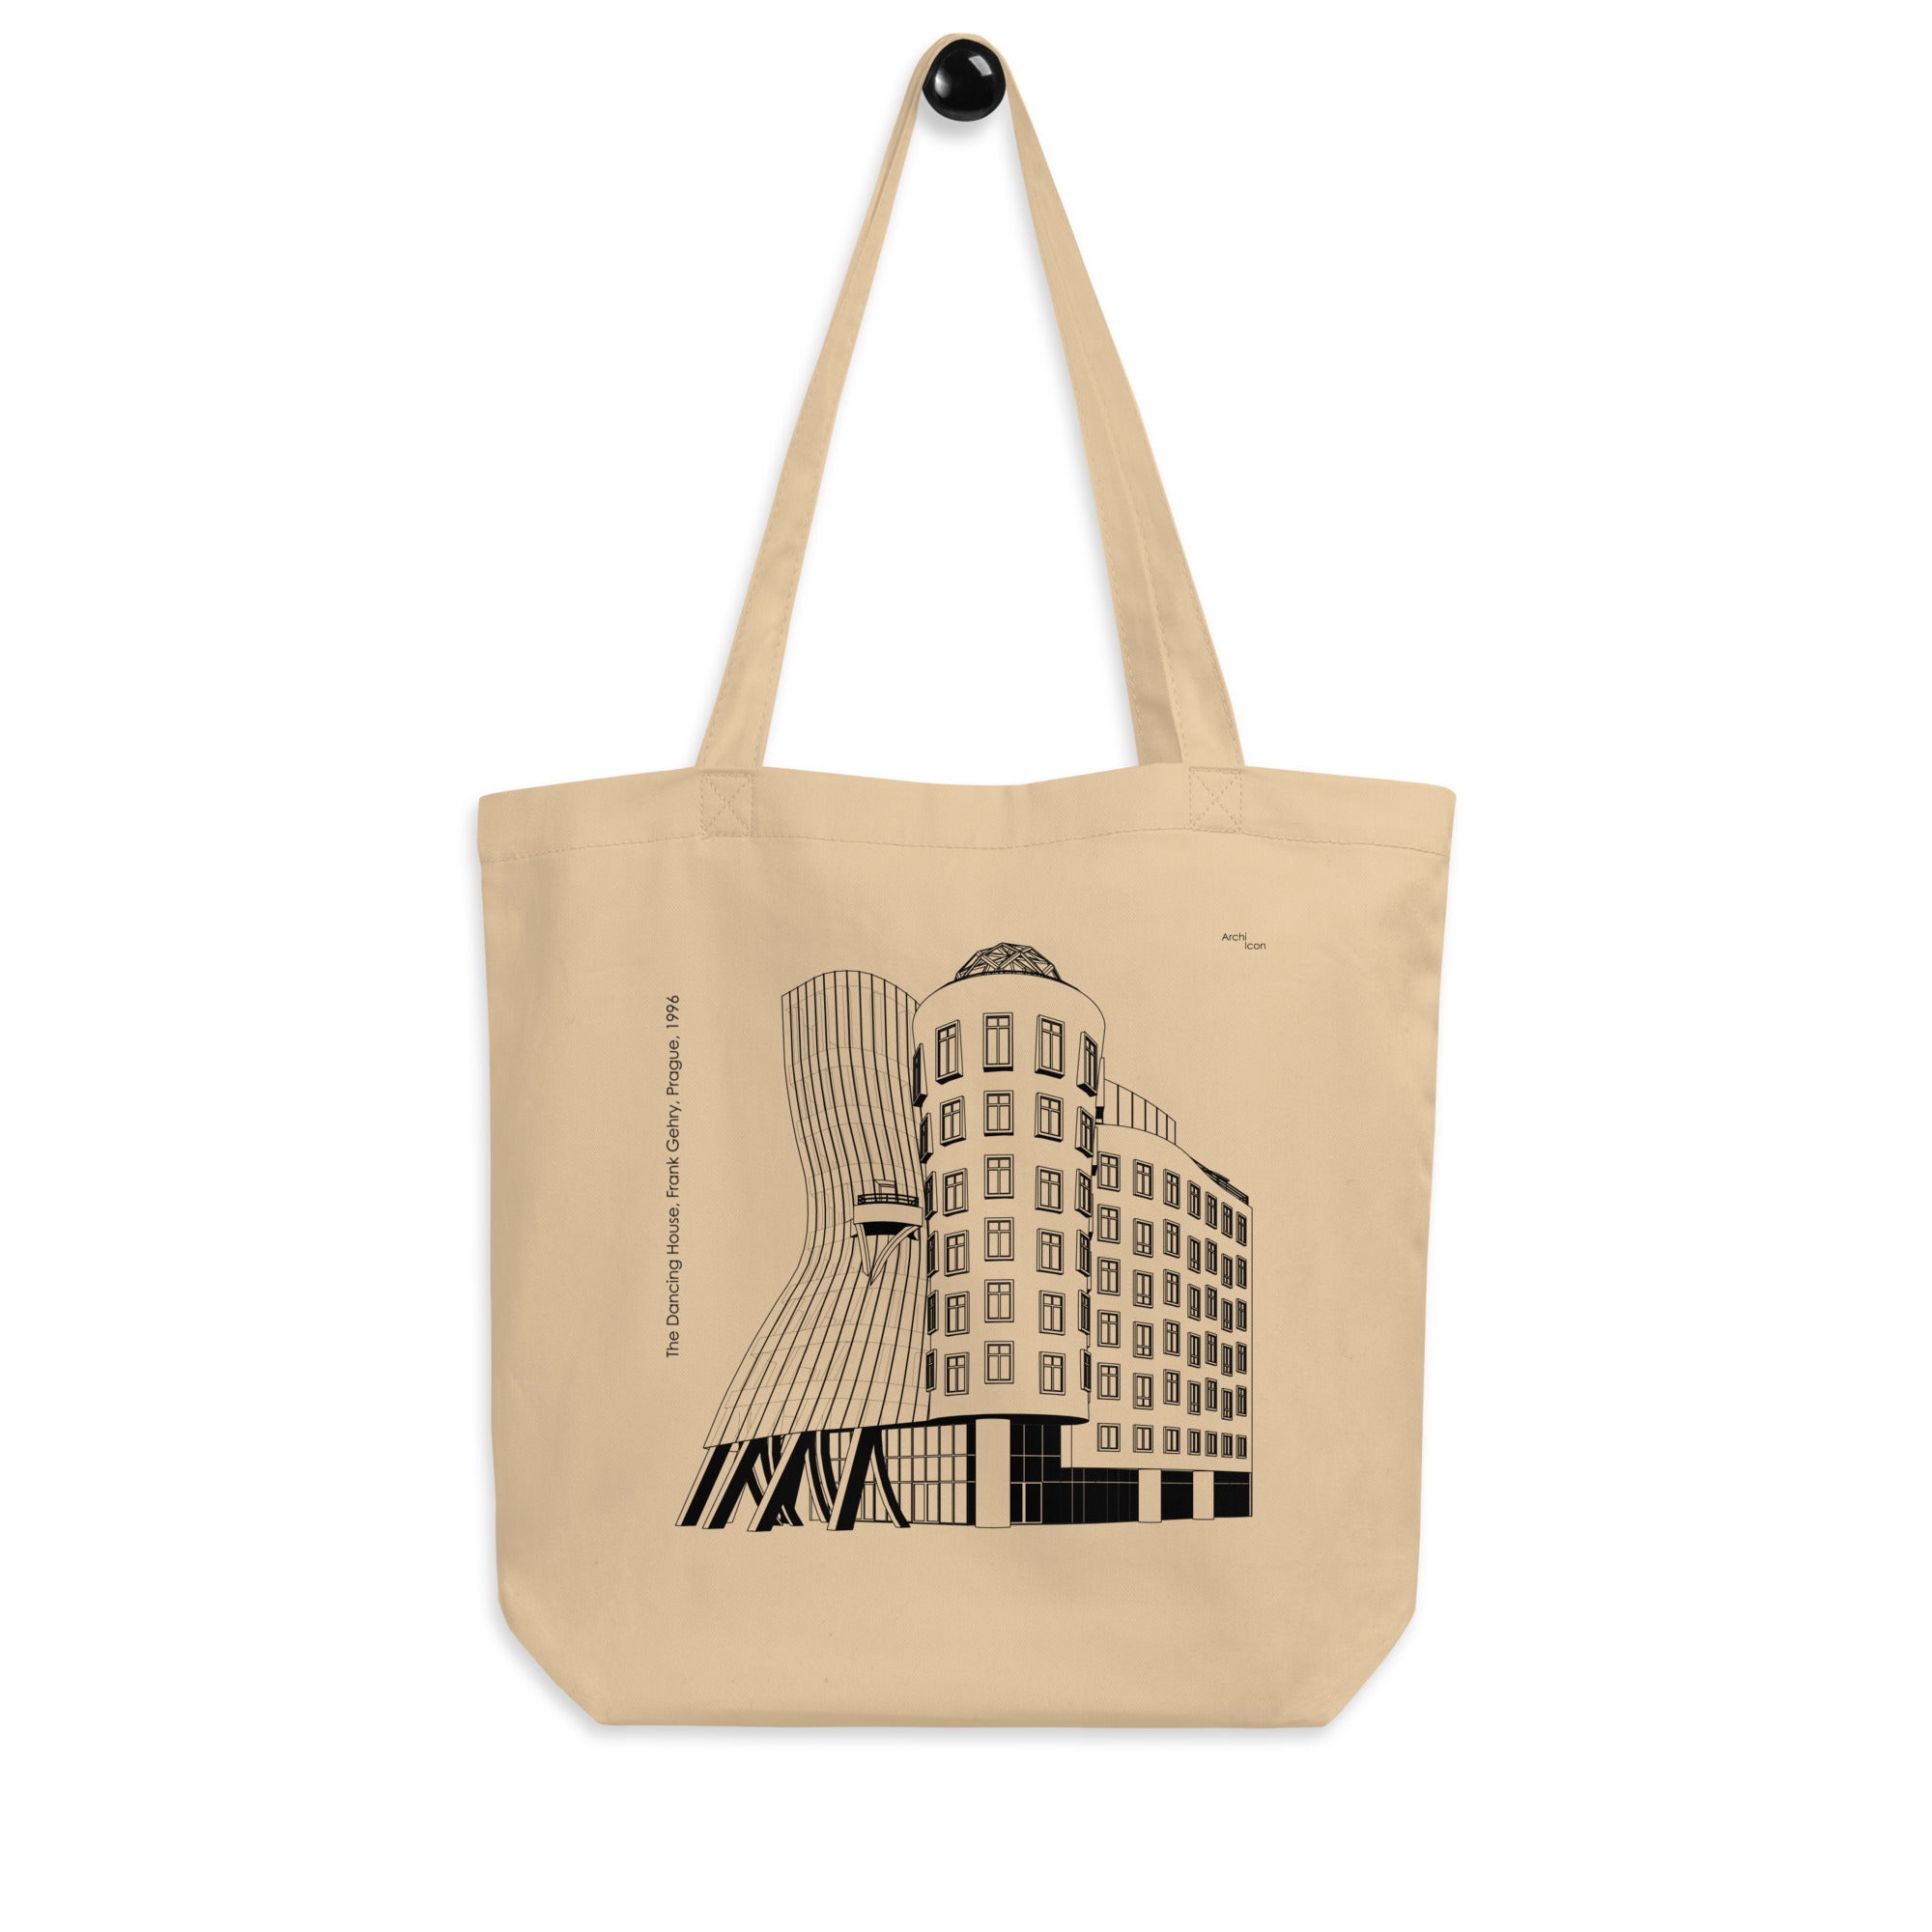 Dancing House Eco Tote Bags